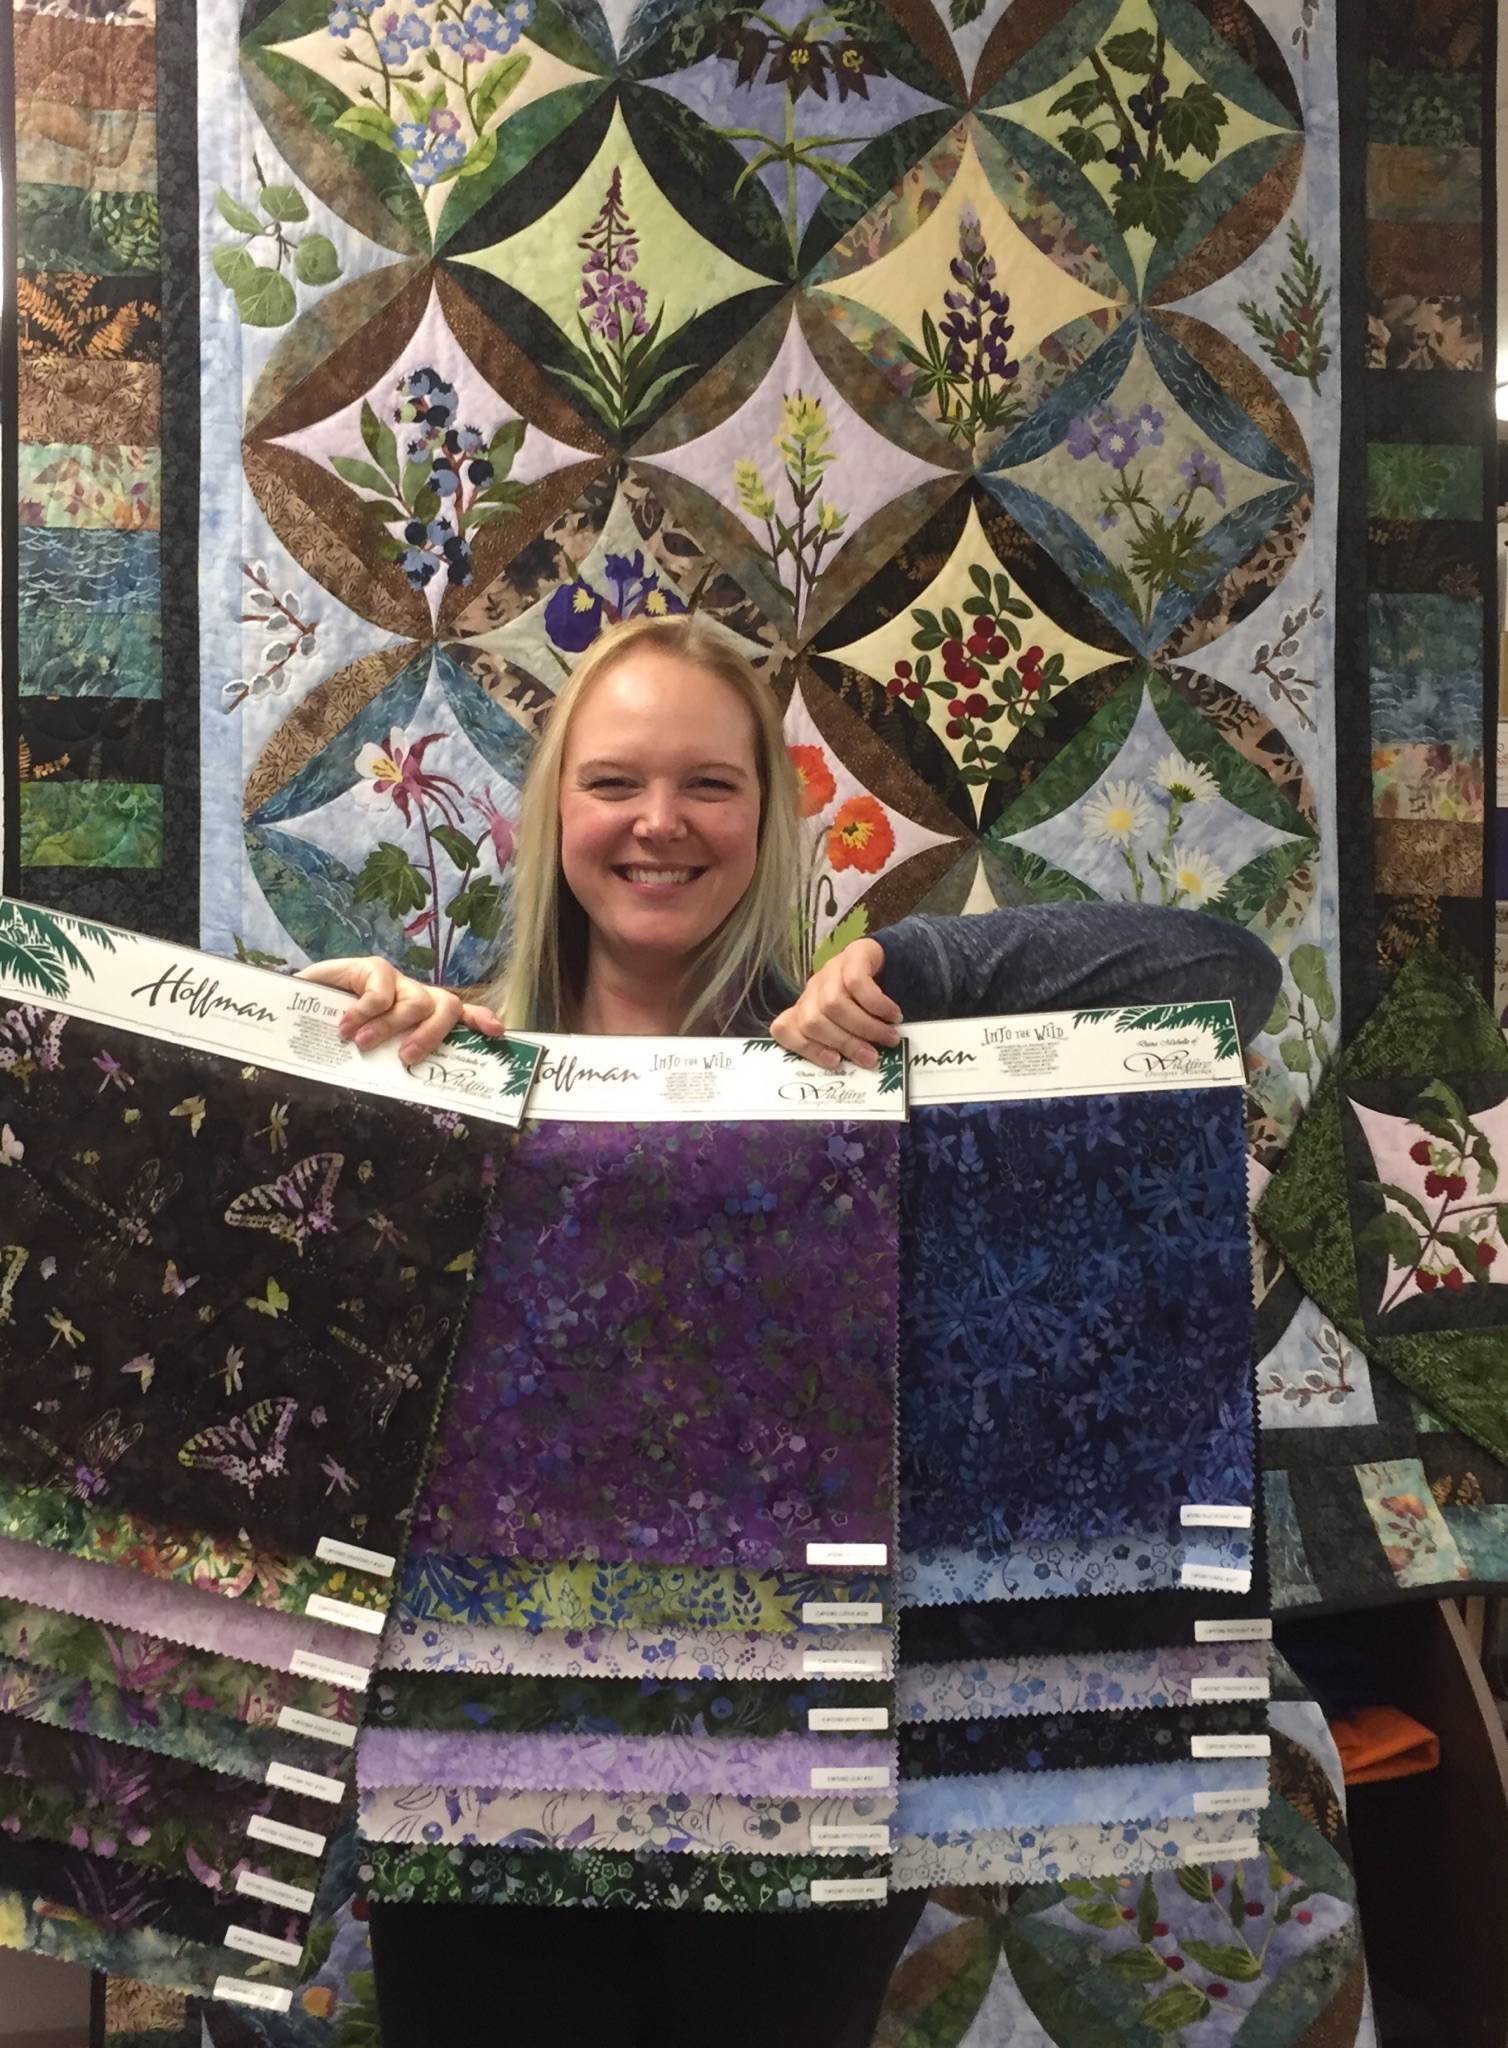 Dana Woodard holds up a selection of her newly designed fabric collection in front of a quilted pattern on display, and for sale, at Kenai Fabric Center. (Photo courtesy Gwen Woodard)